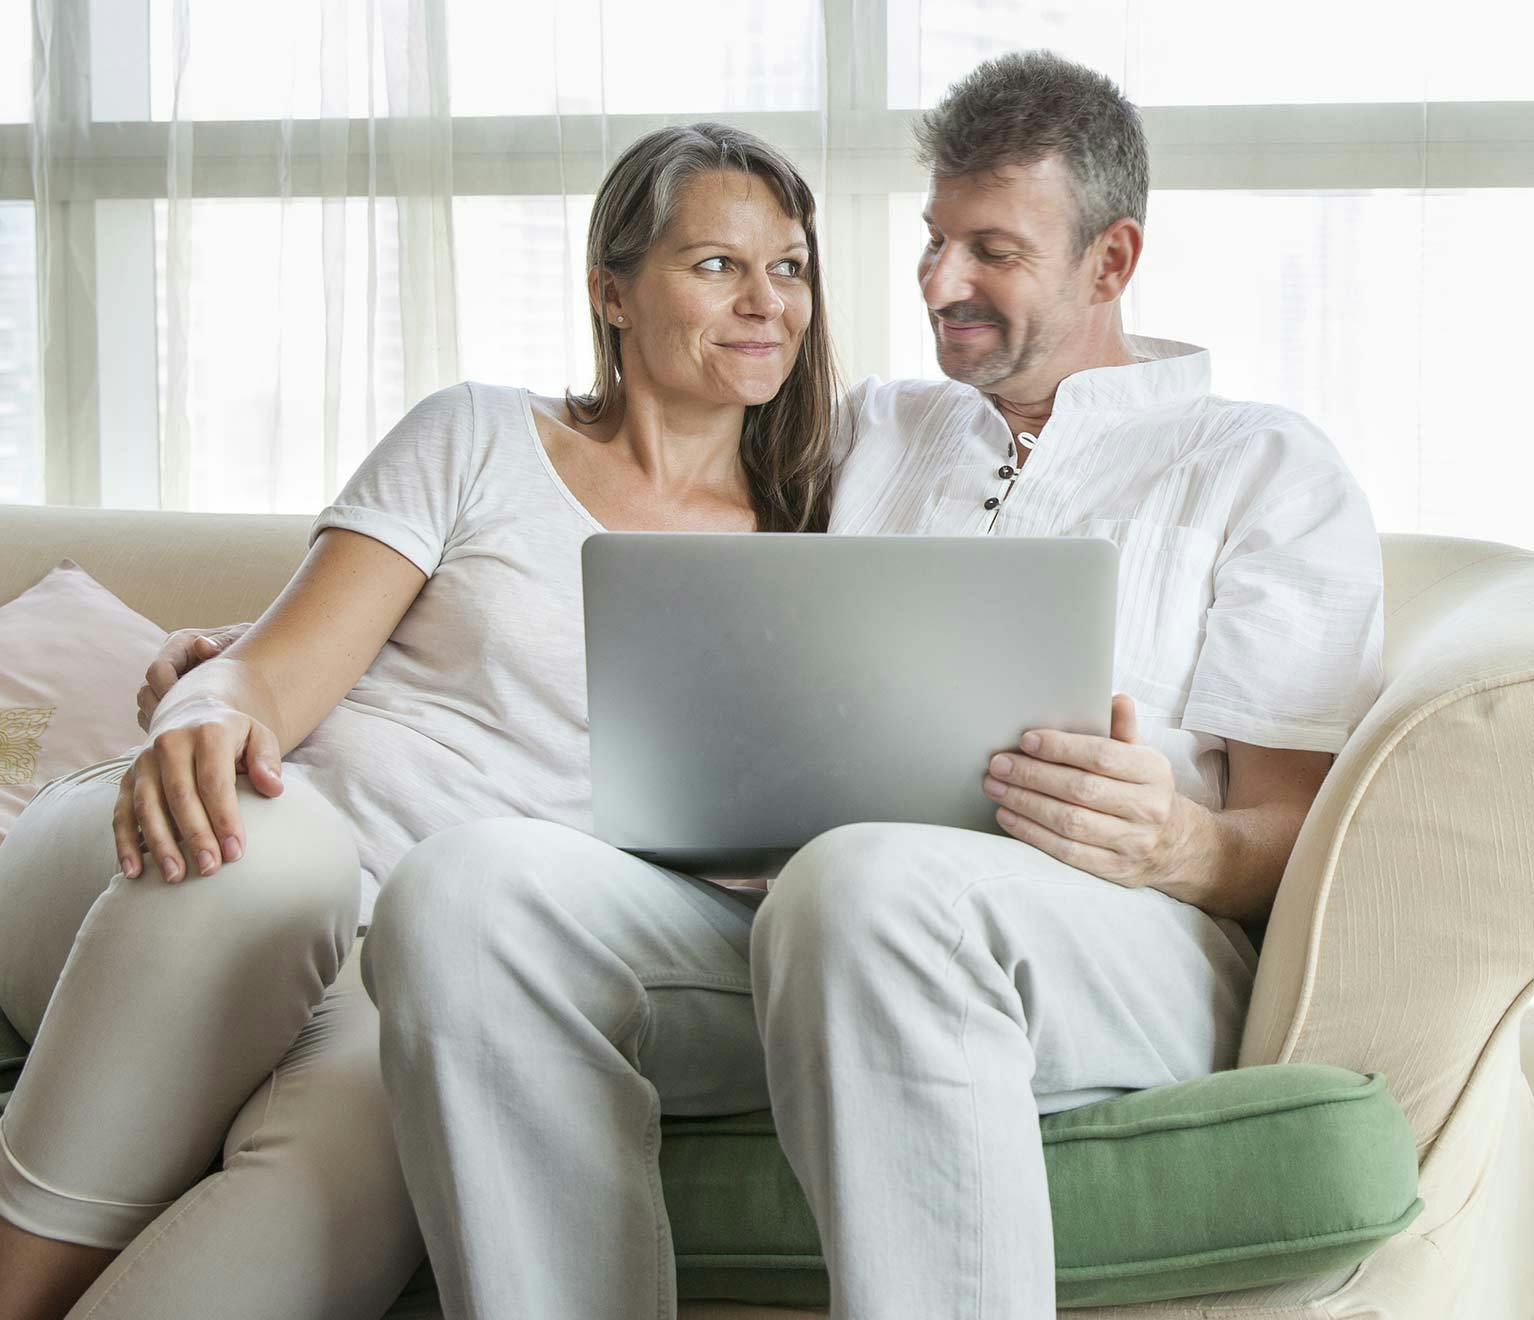 Middle-aged couple sitting on the couch researching ways to save on homeowners insurance.